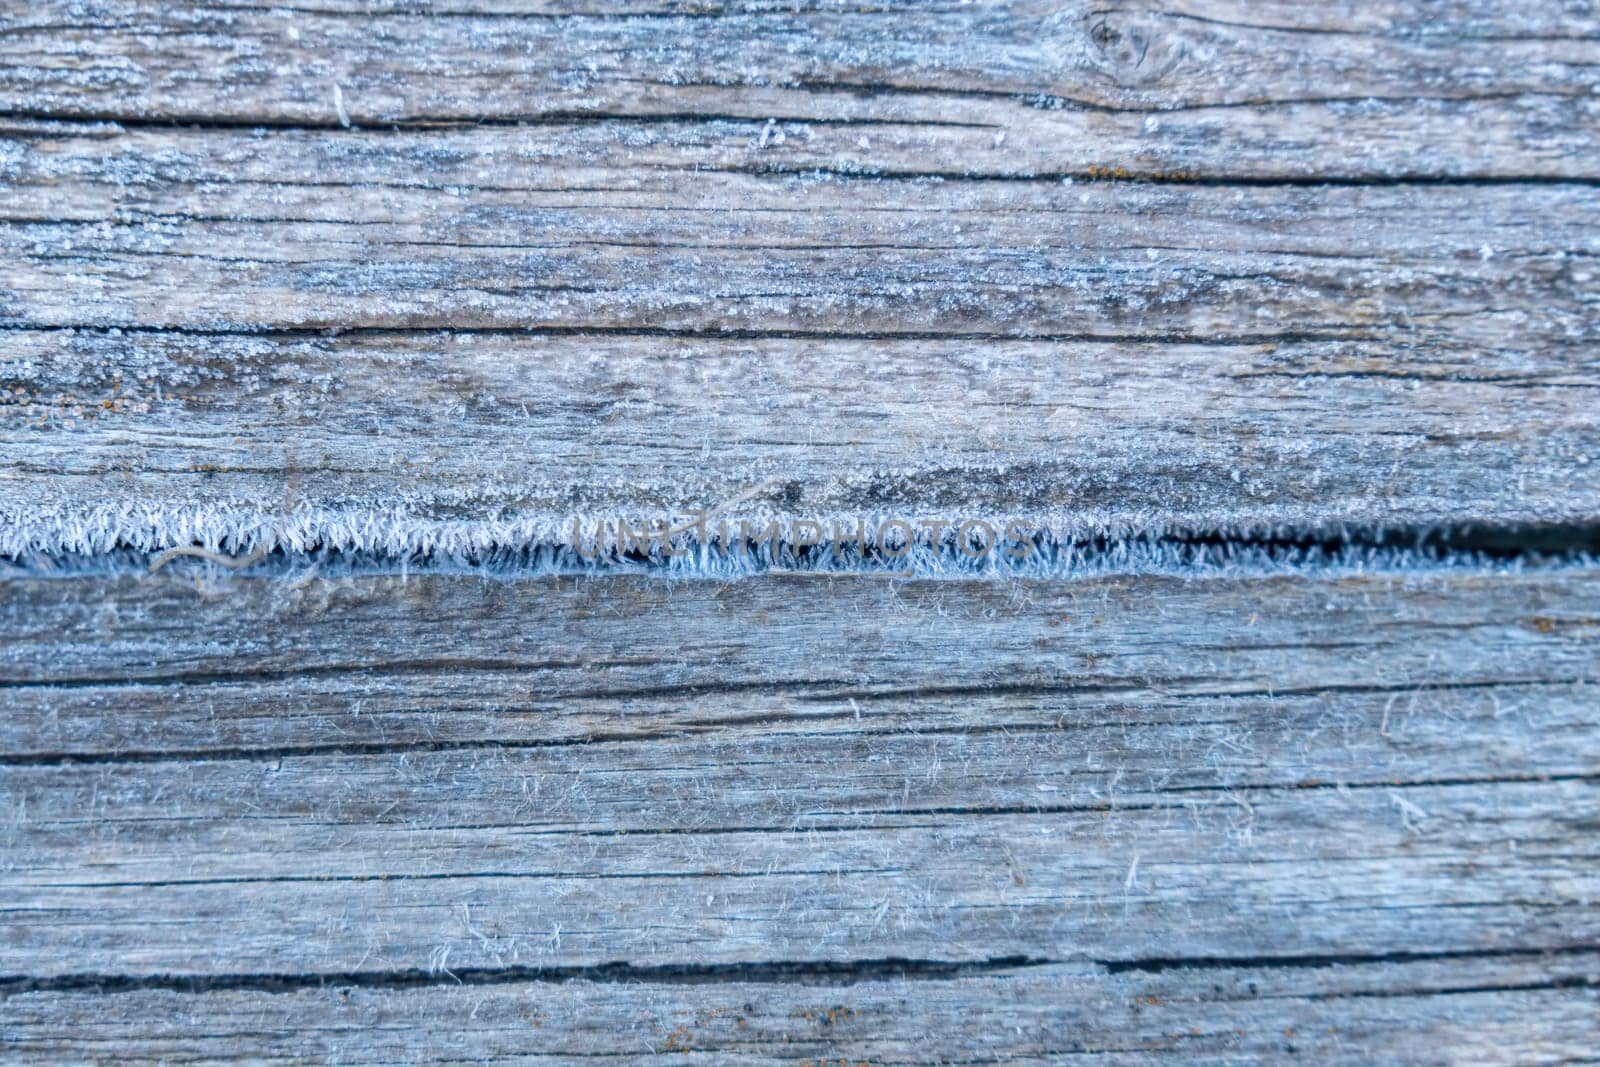 Pale faded brown and cool blue reclaimed wood surface with aged boards lined up. Wooden planks on a wall or floor with grain and texture. Neutral stained vintage wood background.